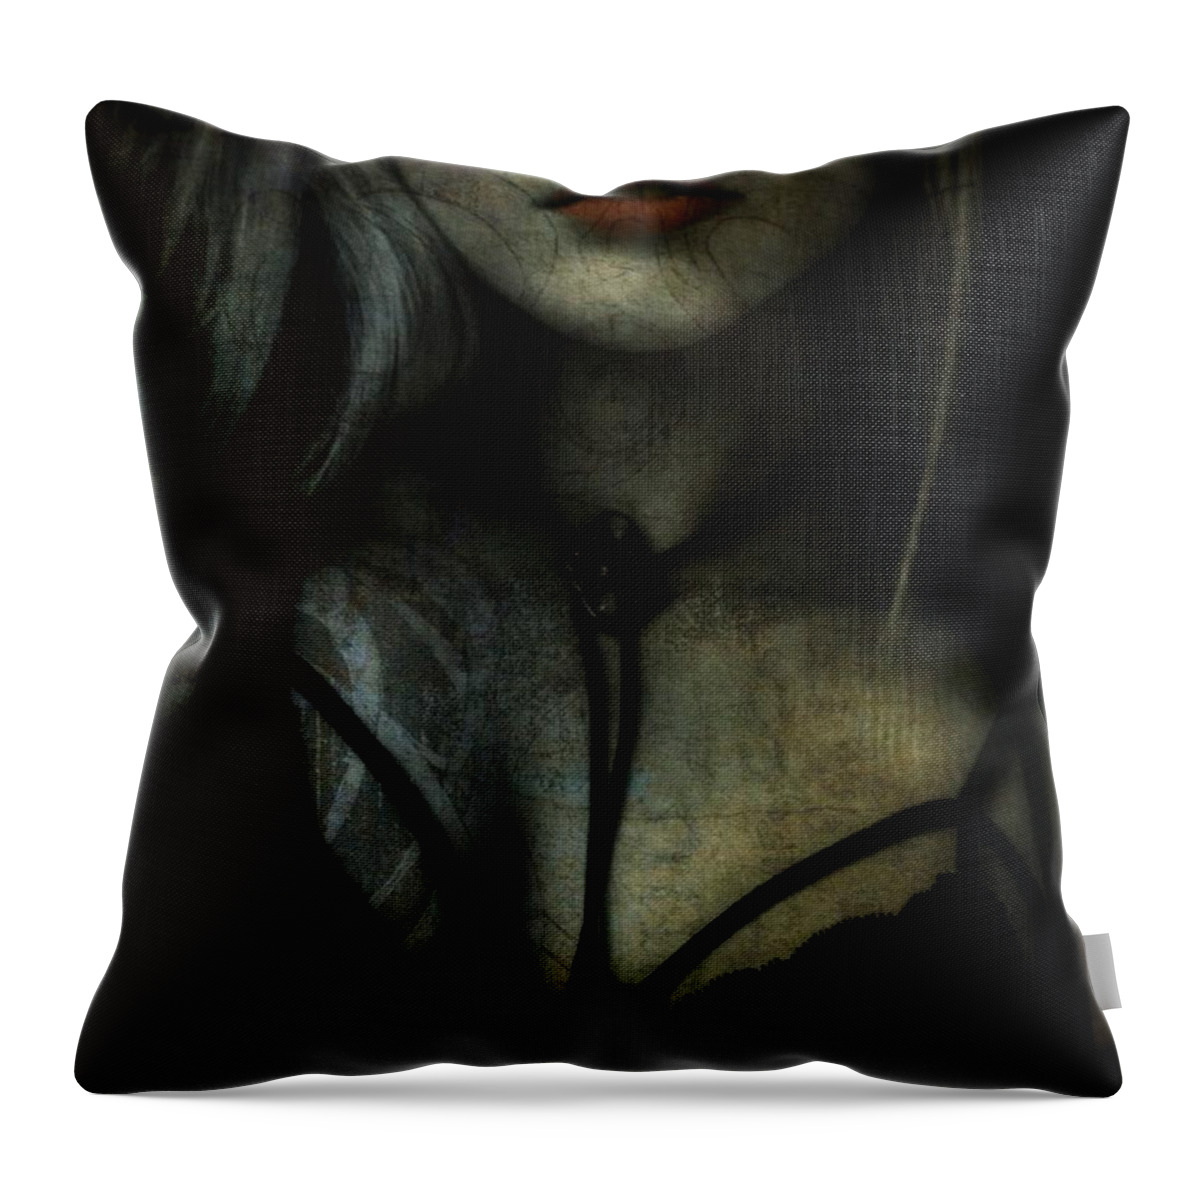 Fleetwood Mac Throw Pillow featuring the painting Gypsy - Stevie Nicks - Resize by Paul Lovering